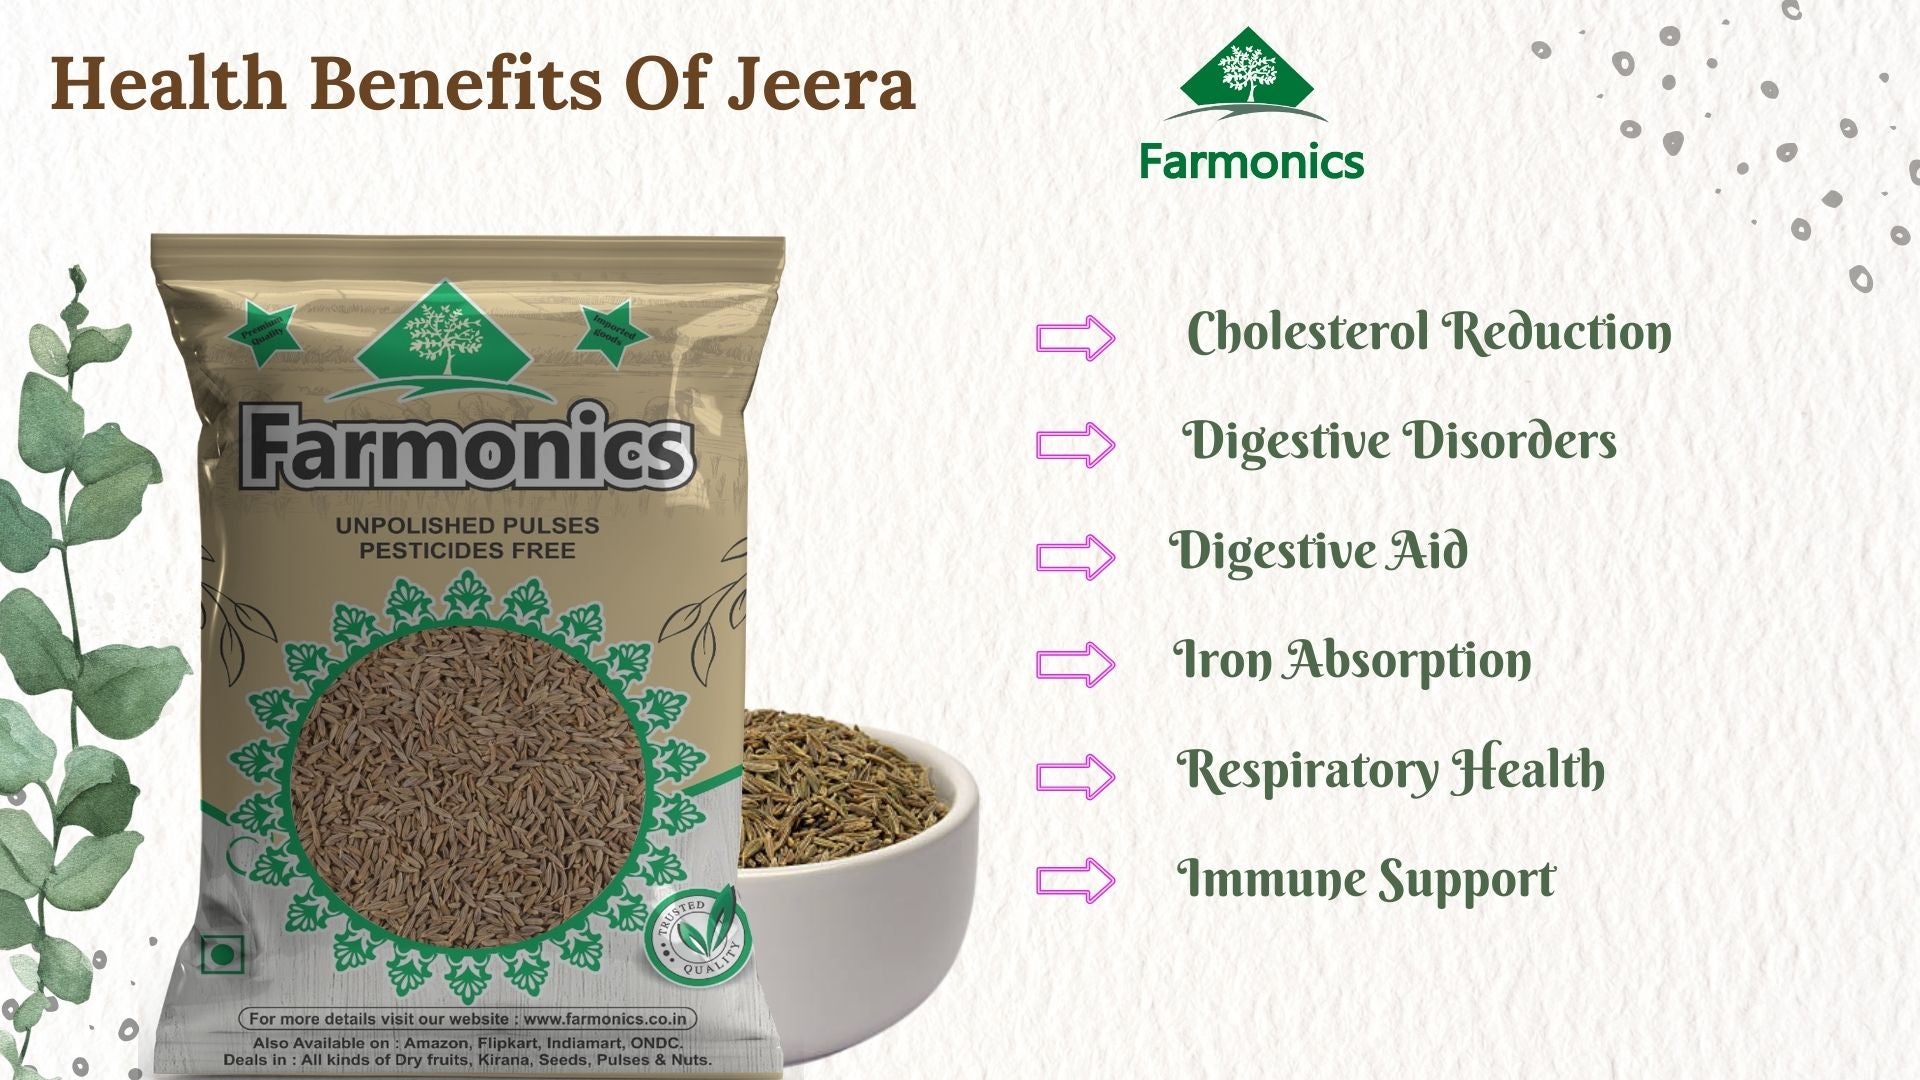 here are the list of health benefits of jerera you will get from farmonics 